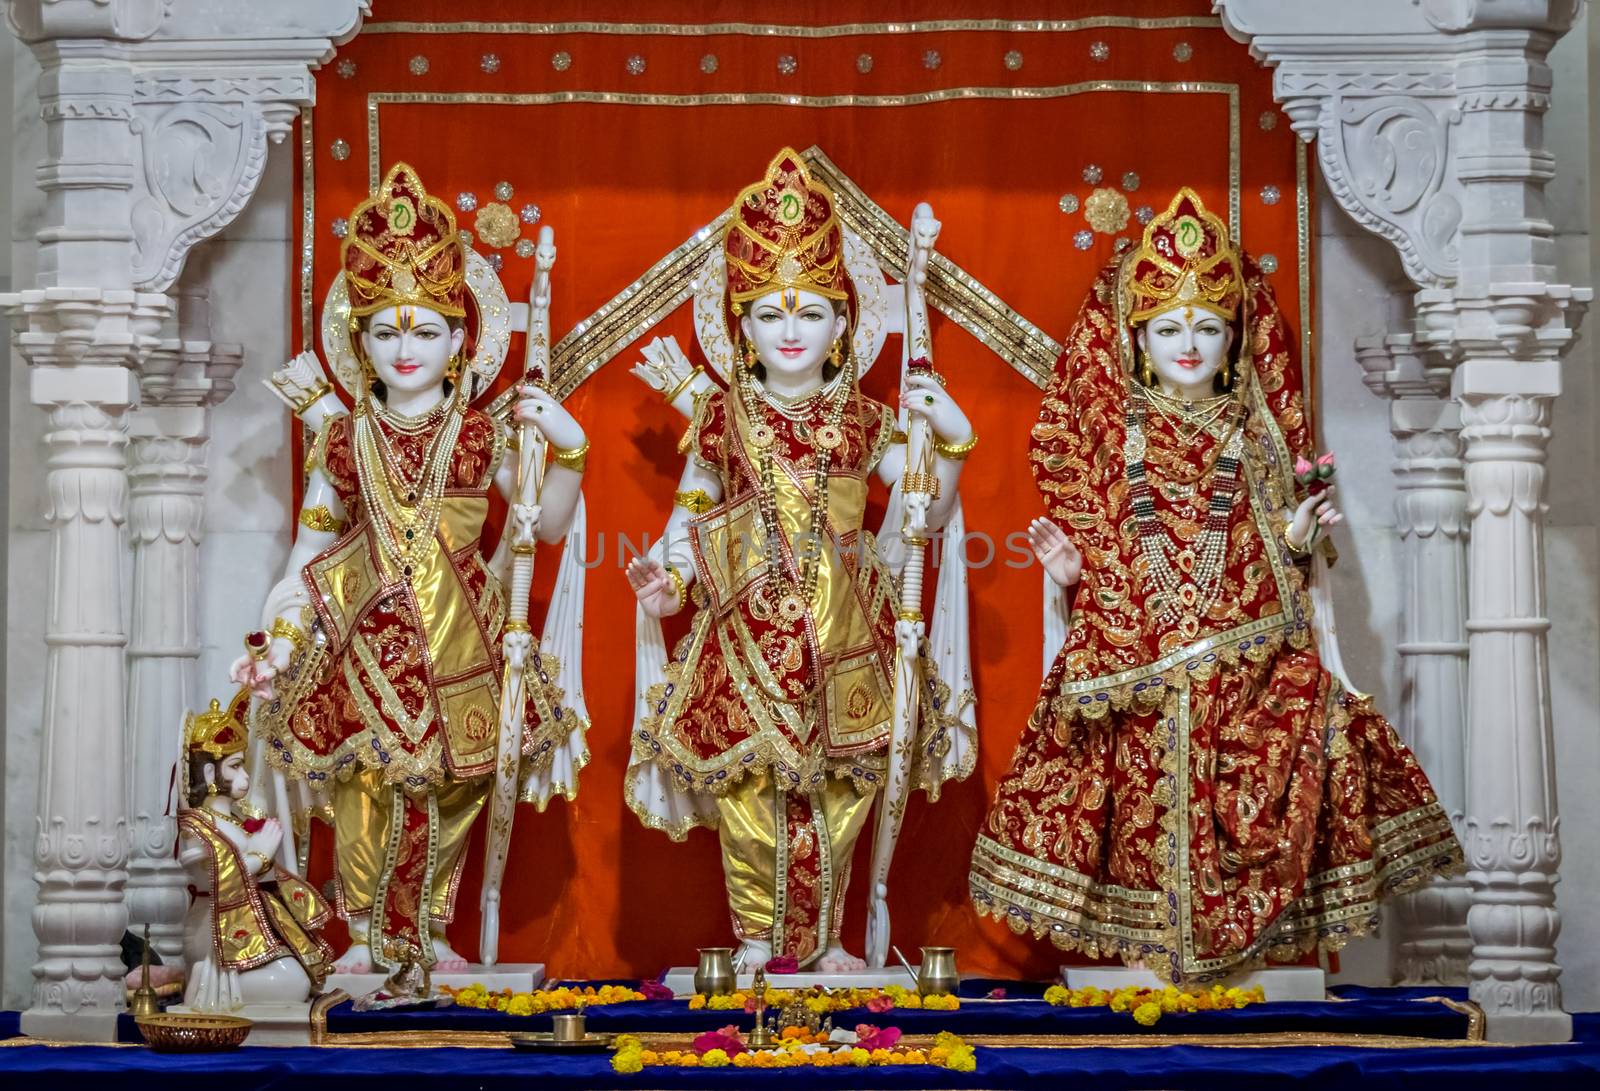 Decorated idols of Hindu Gods Ram, Lakshman & Godless Sita together in a temple at Somnath, Gujrat, India. by lalam